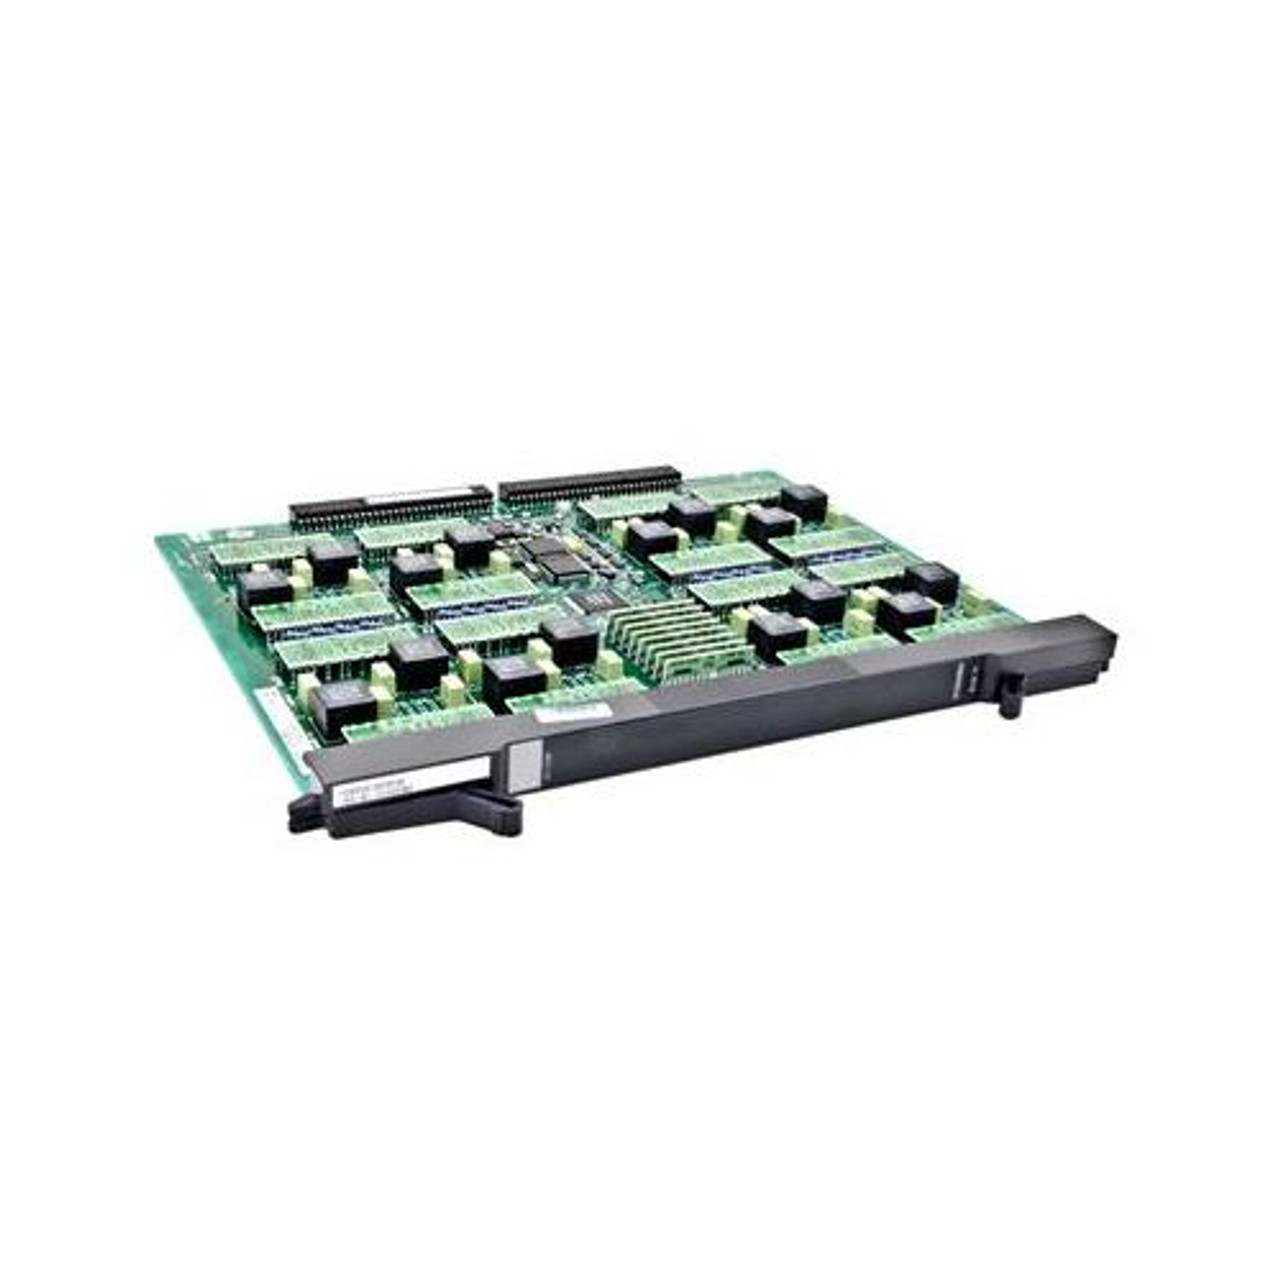 700229818 Avaya Partner ACS 5-Slots Carrier with Cover (Refurbished)